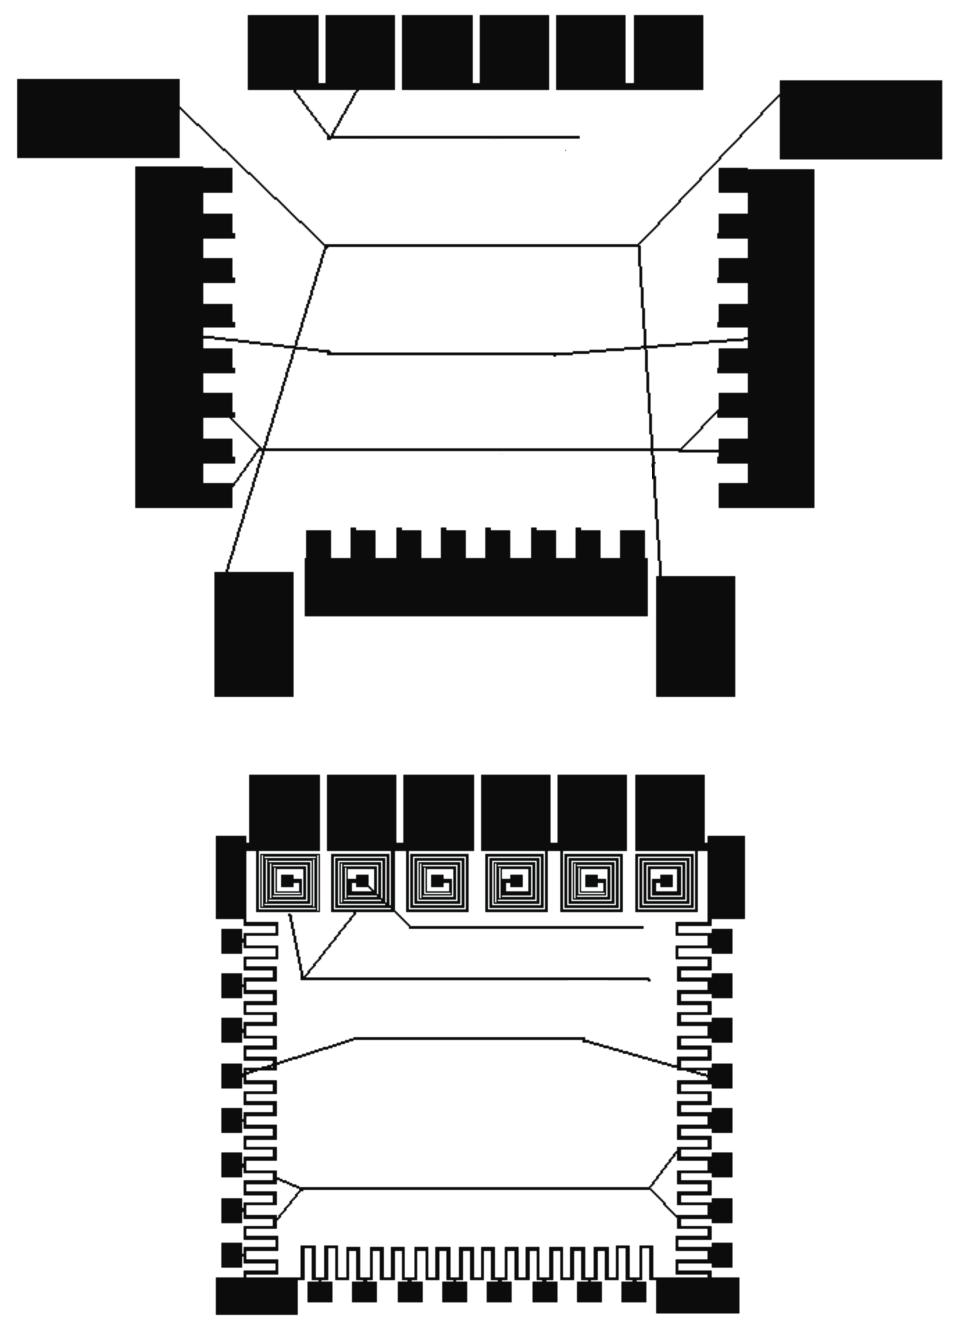 The detailed layout of the developed ratrace coupler is shown in Fig. 4.